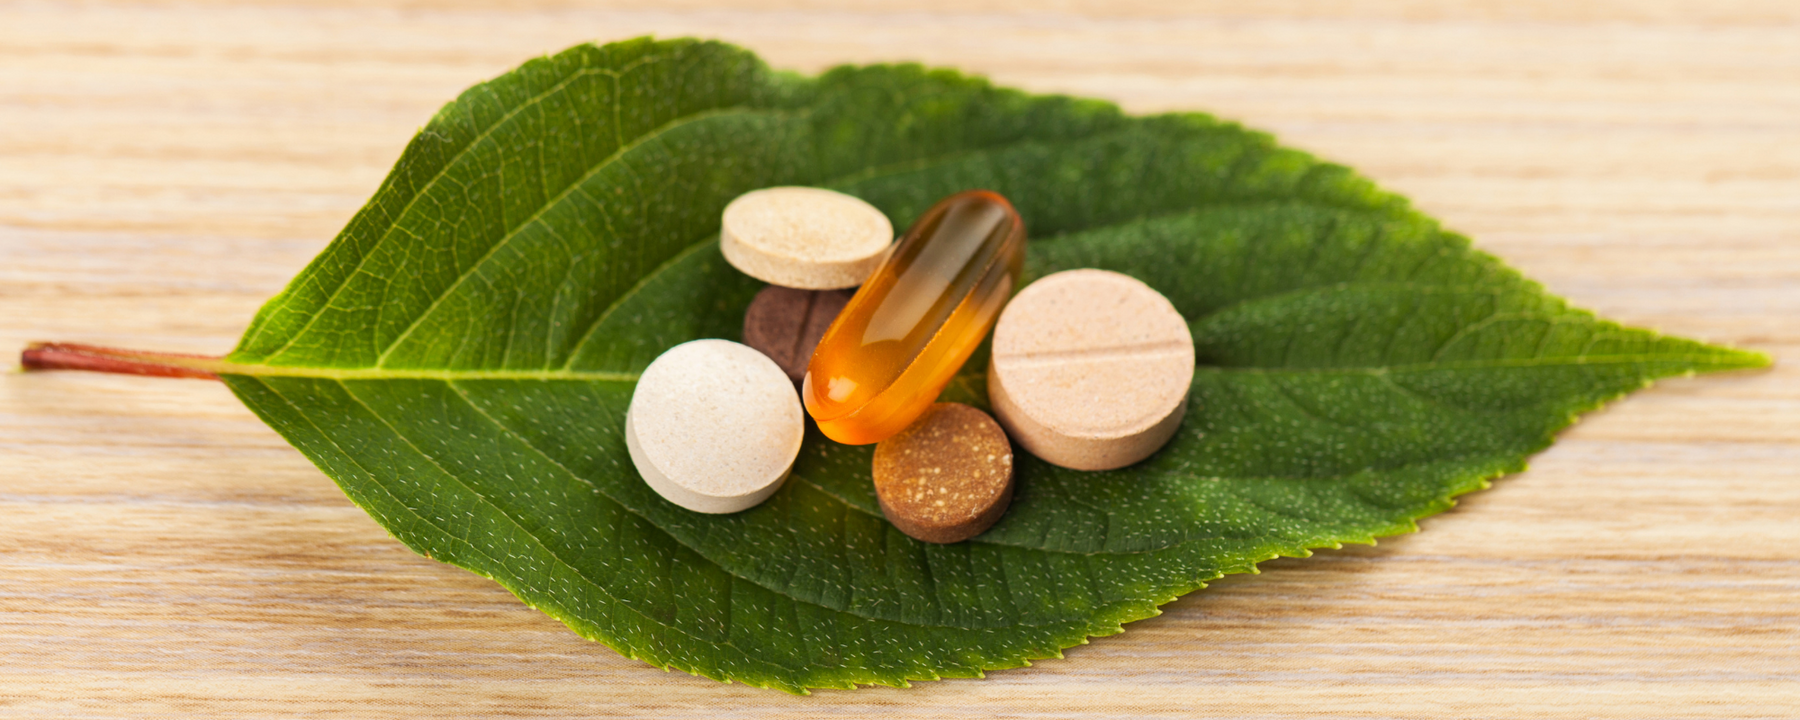 Does your child need supplements?